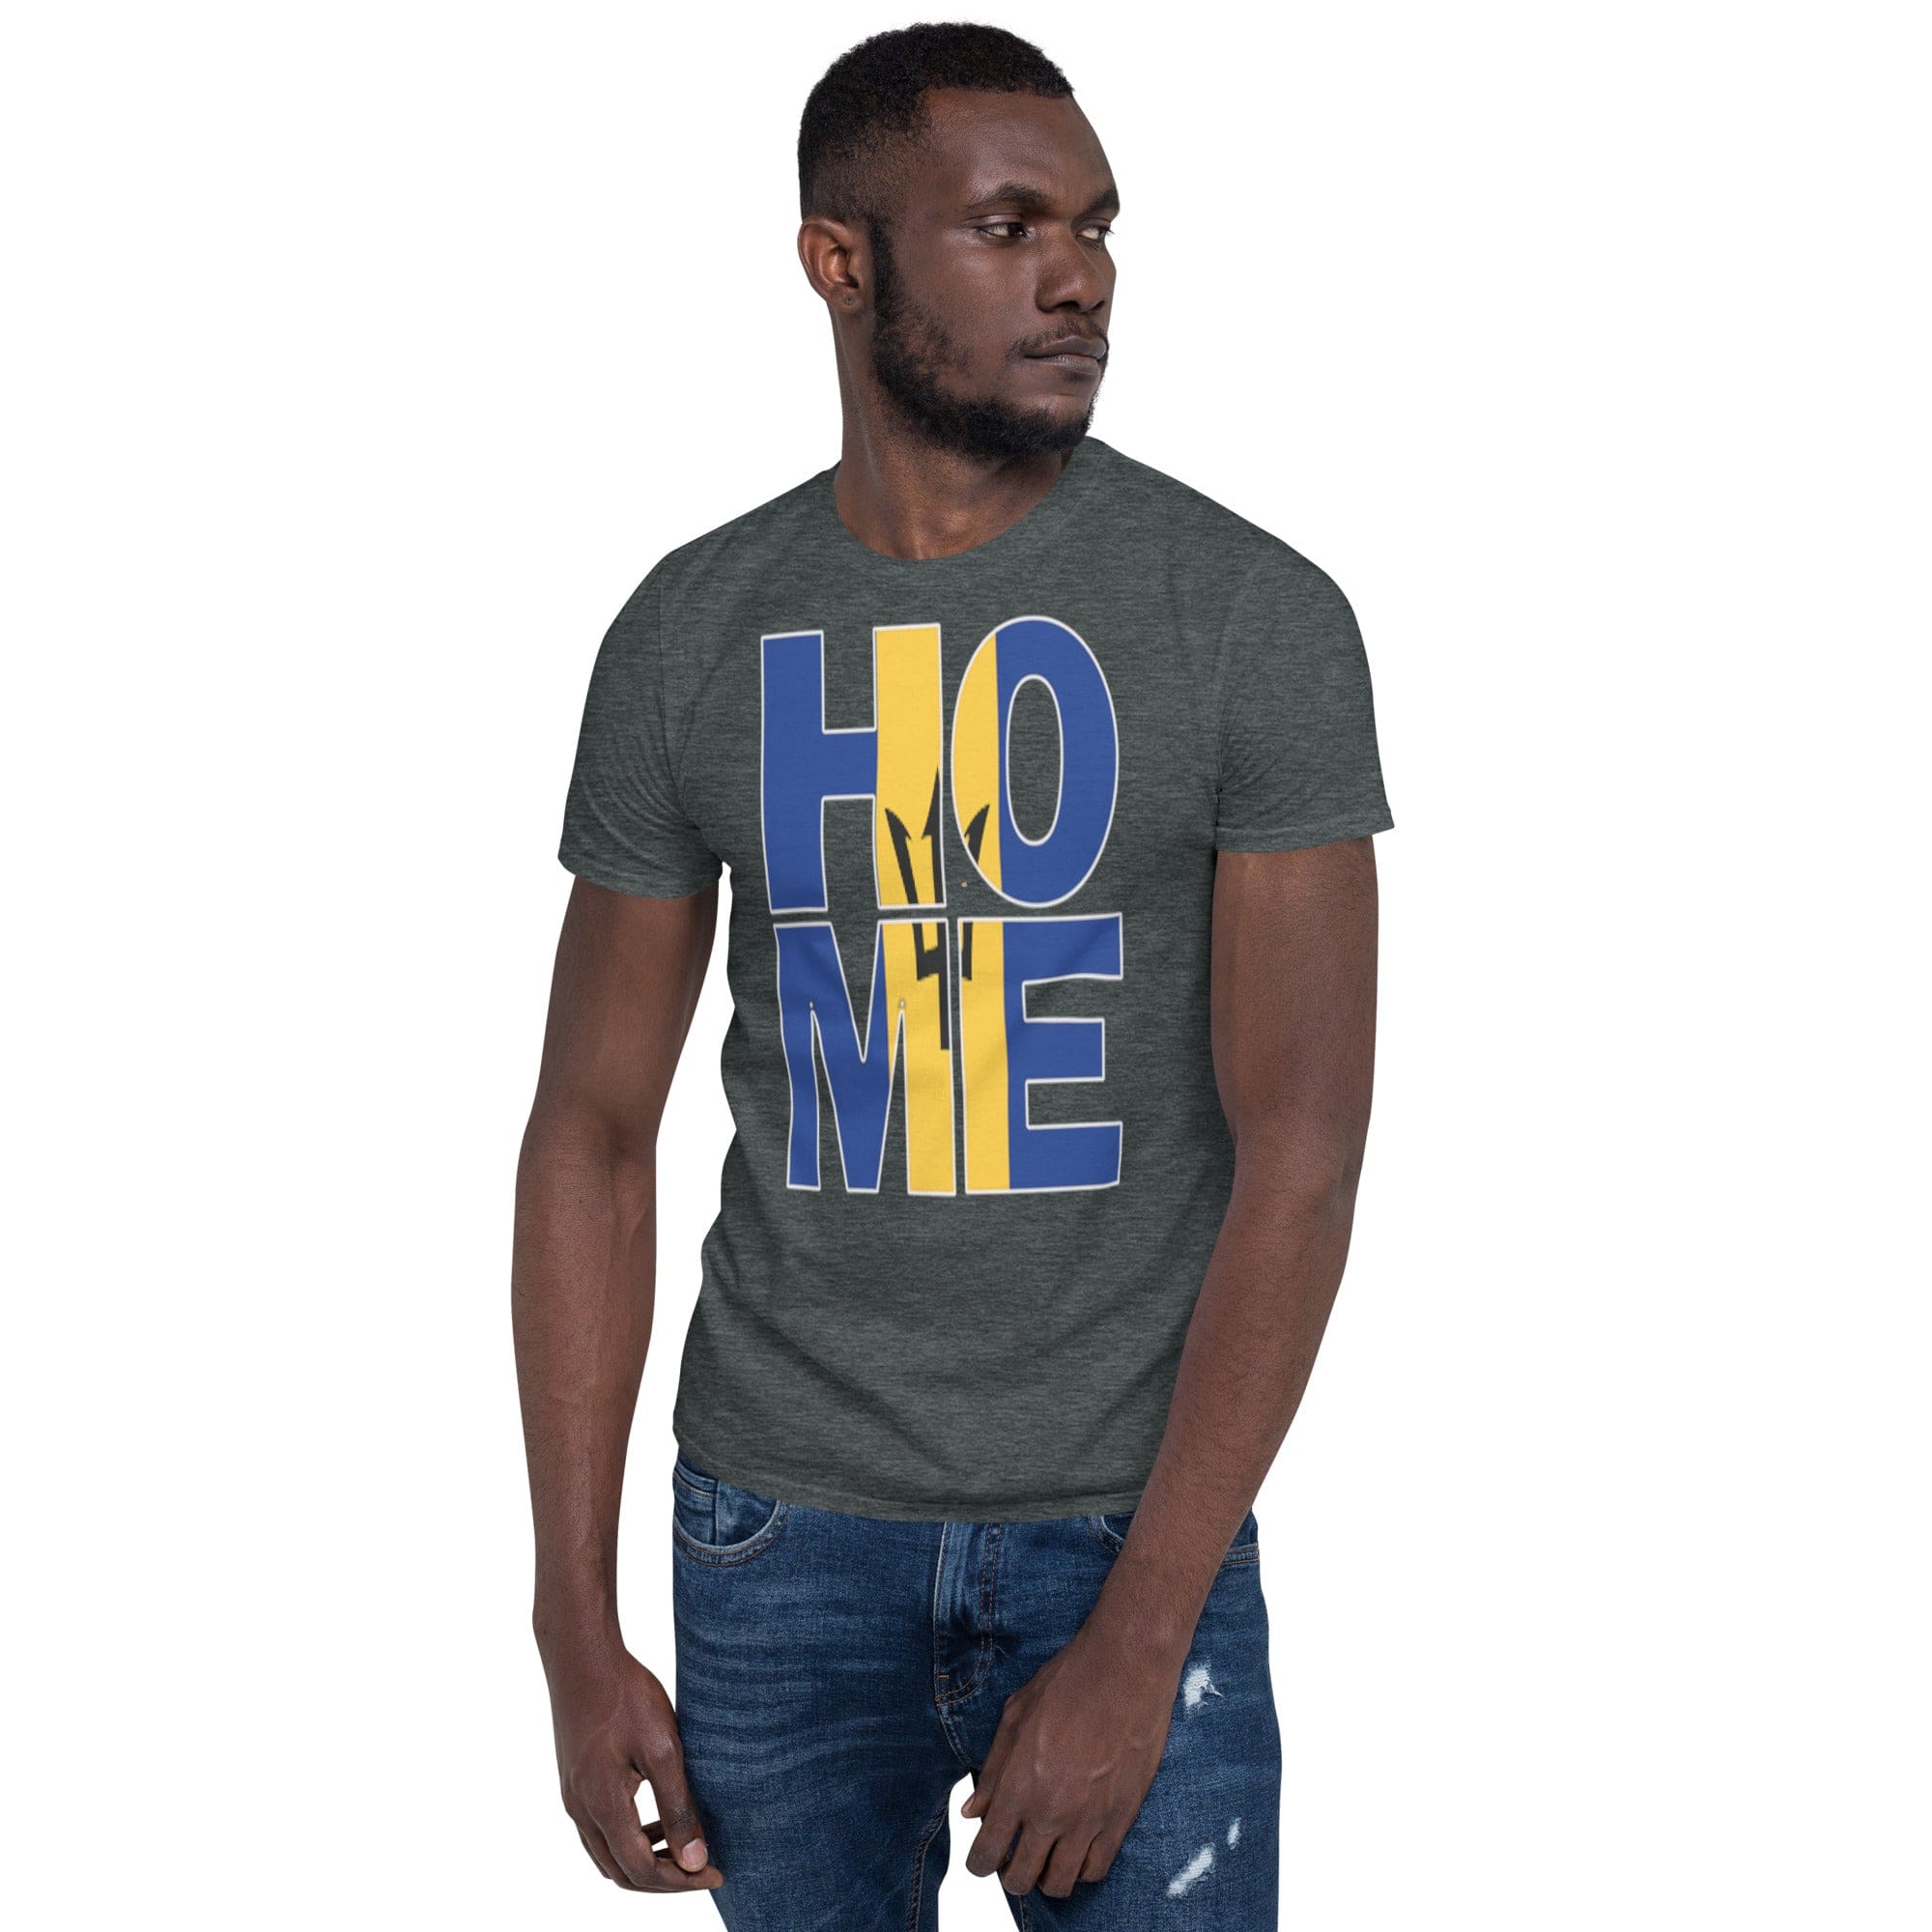 Barbados flag design in the words HOME on a dark heather color shirt on the front of a black man.